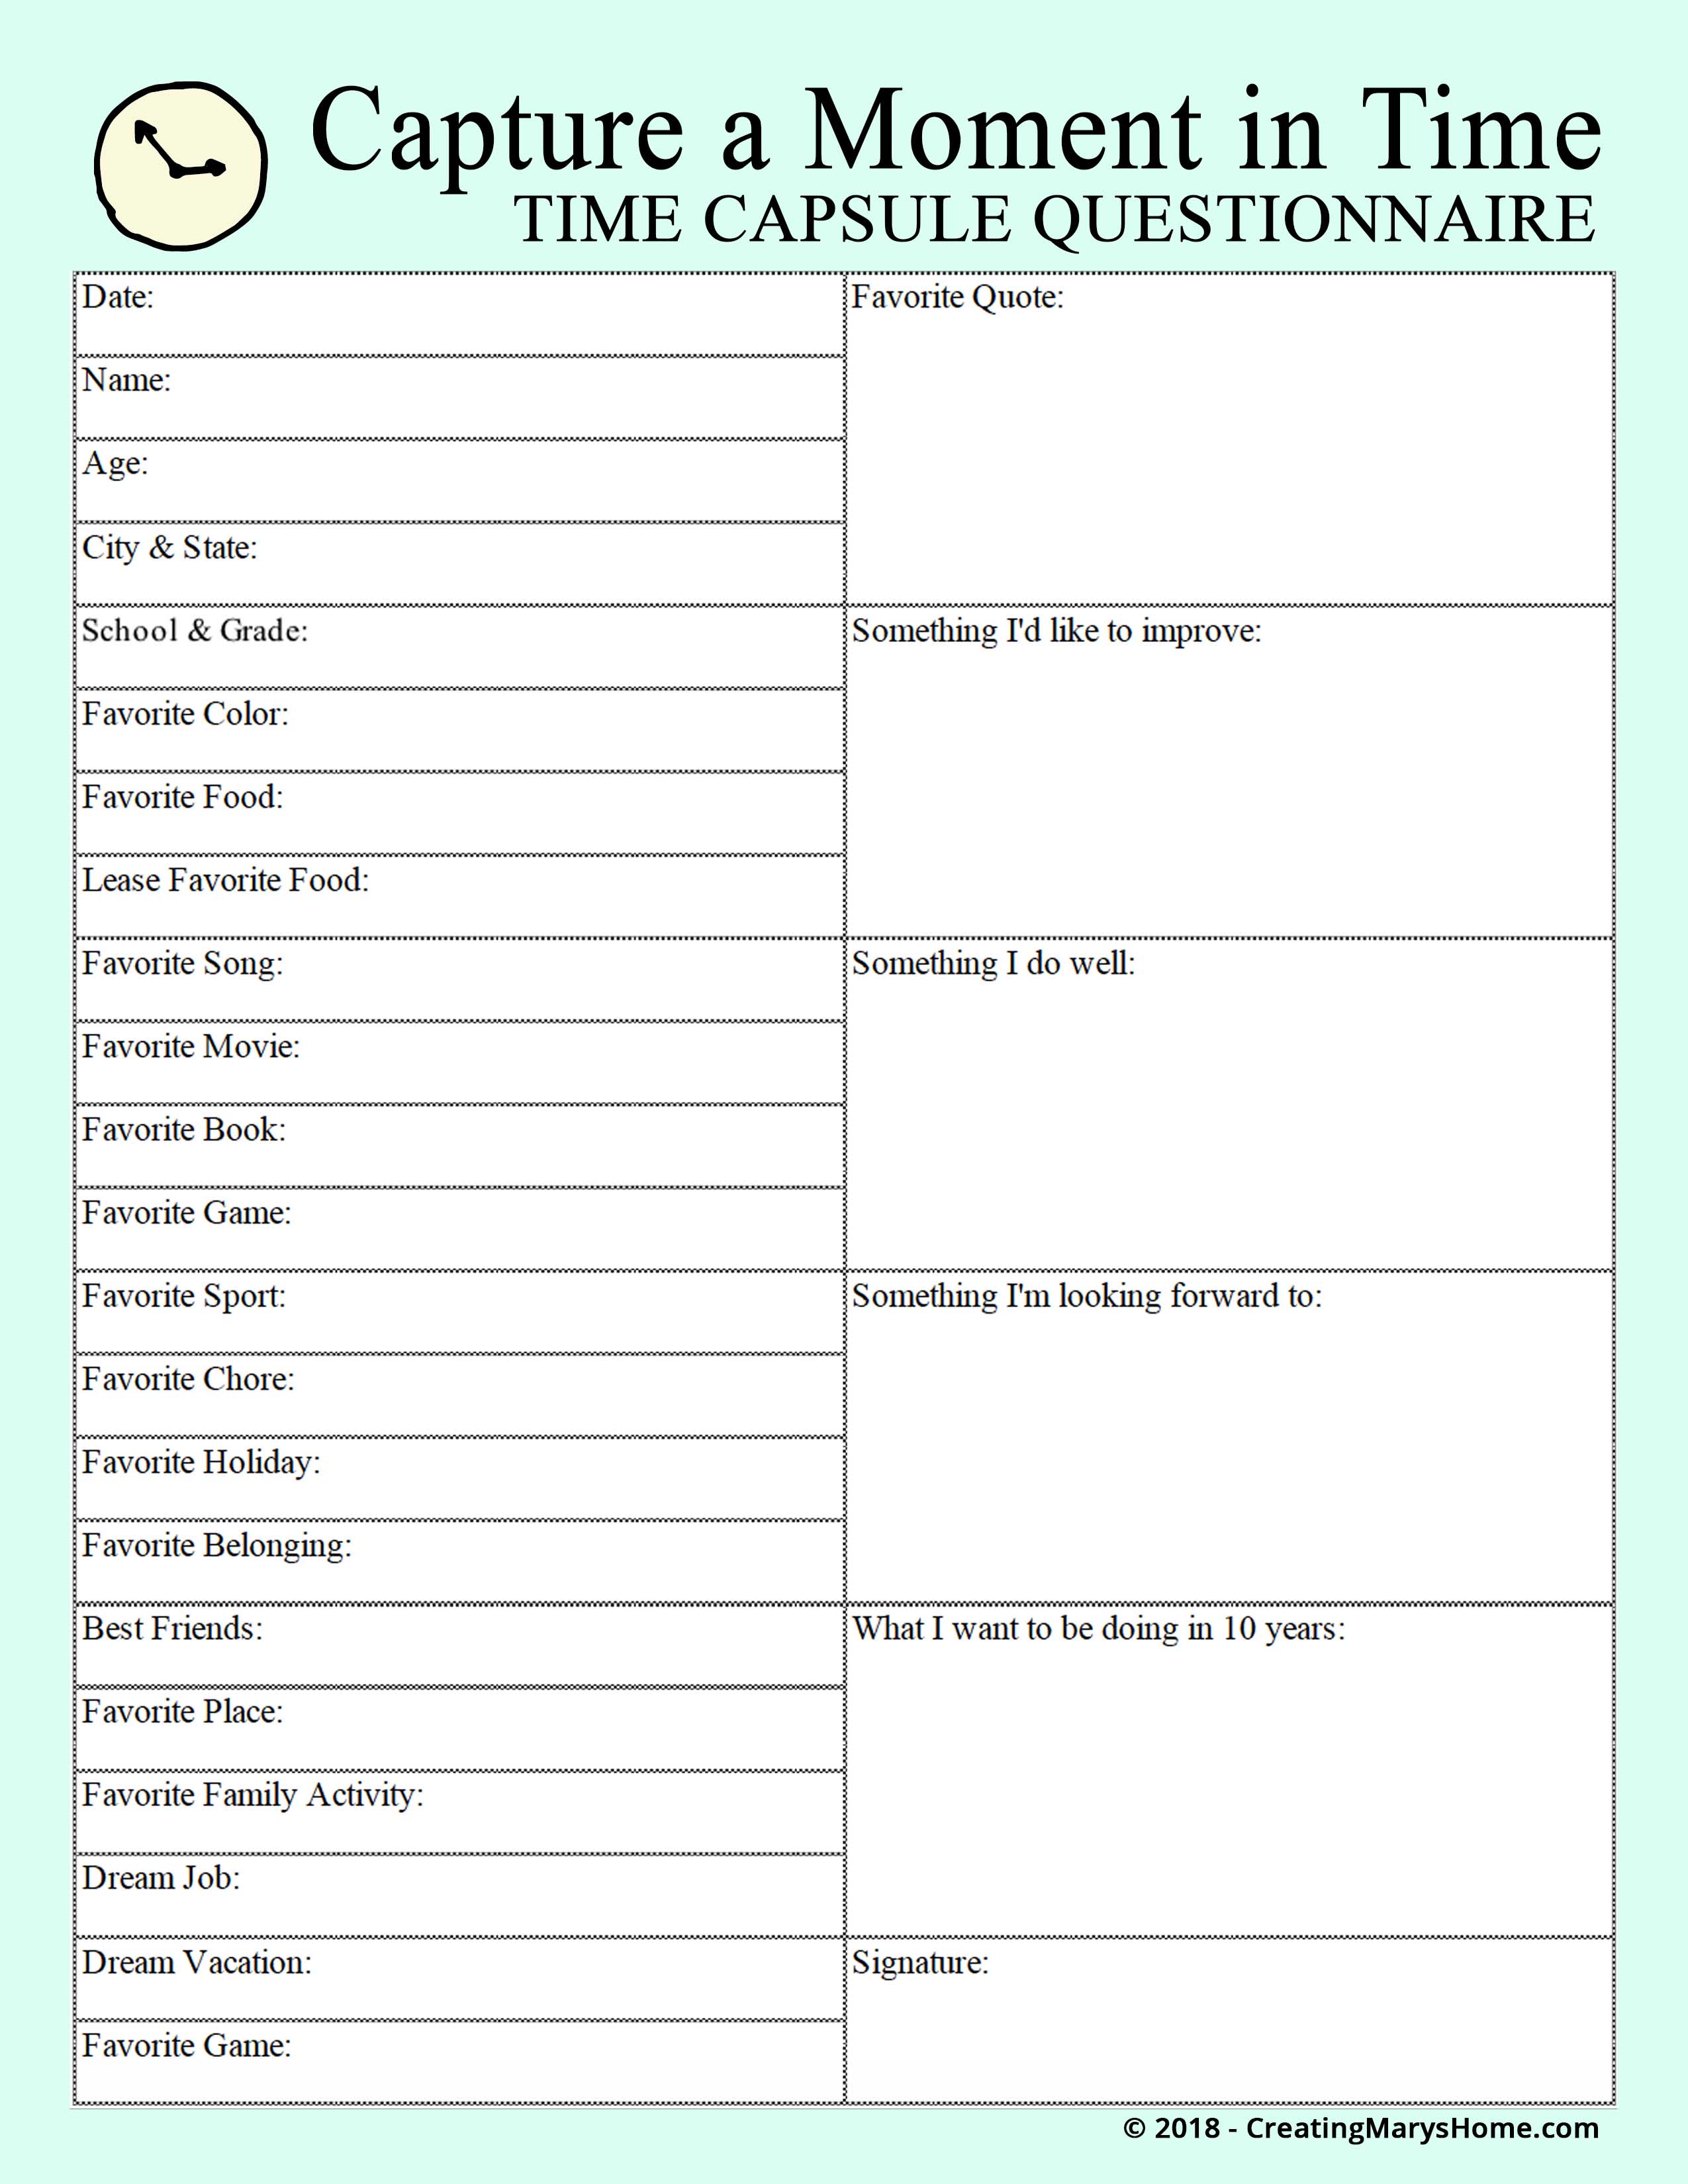 Time Capsule Questions FREE PRINTABLE v